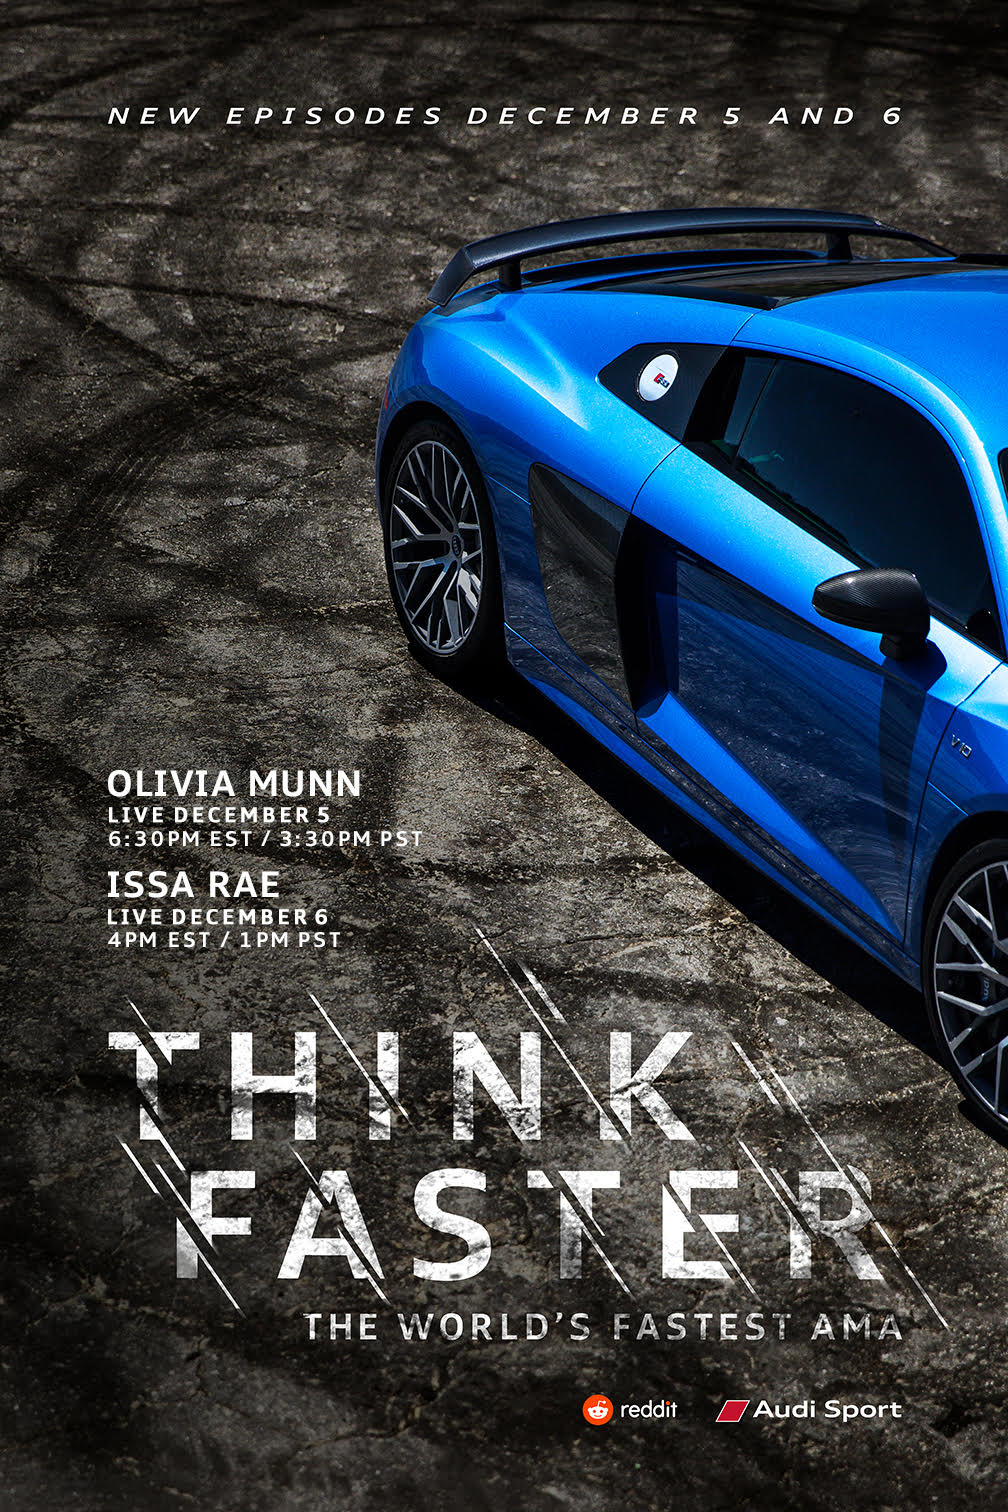 Audi teams up with Reddit for the second installment of the world’s fastest livestream AMA series, “Think Faster”